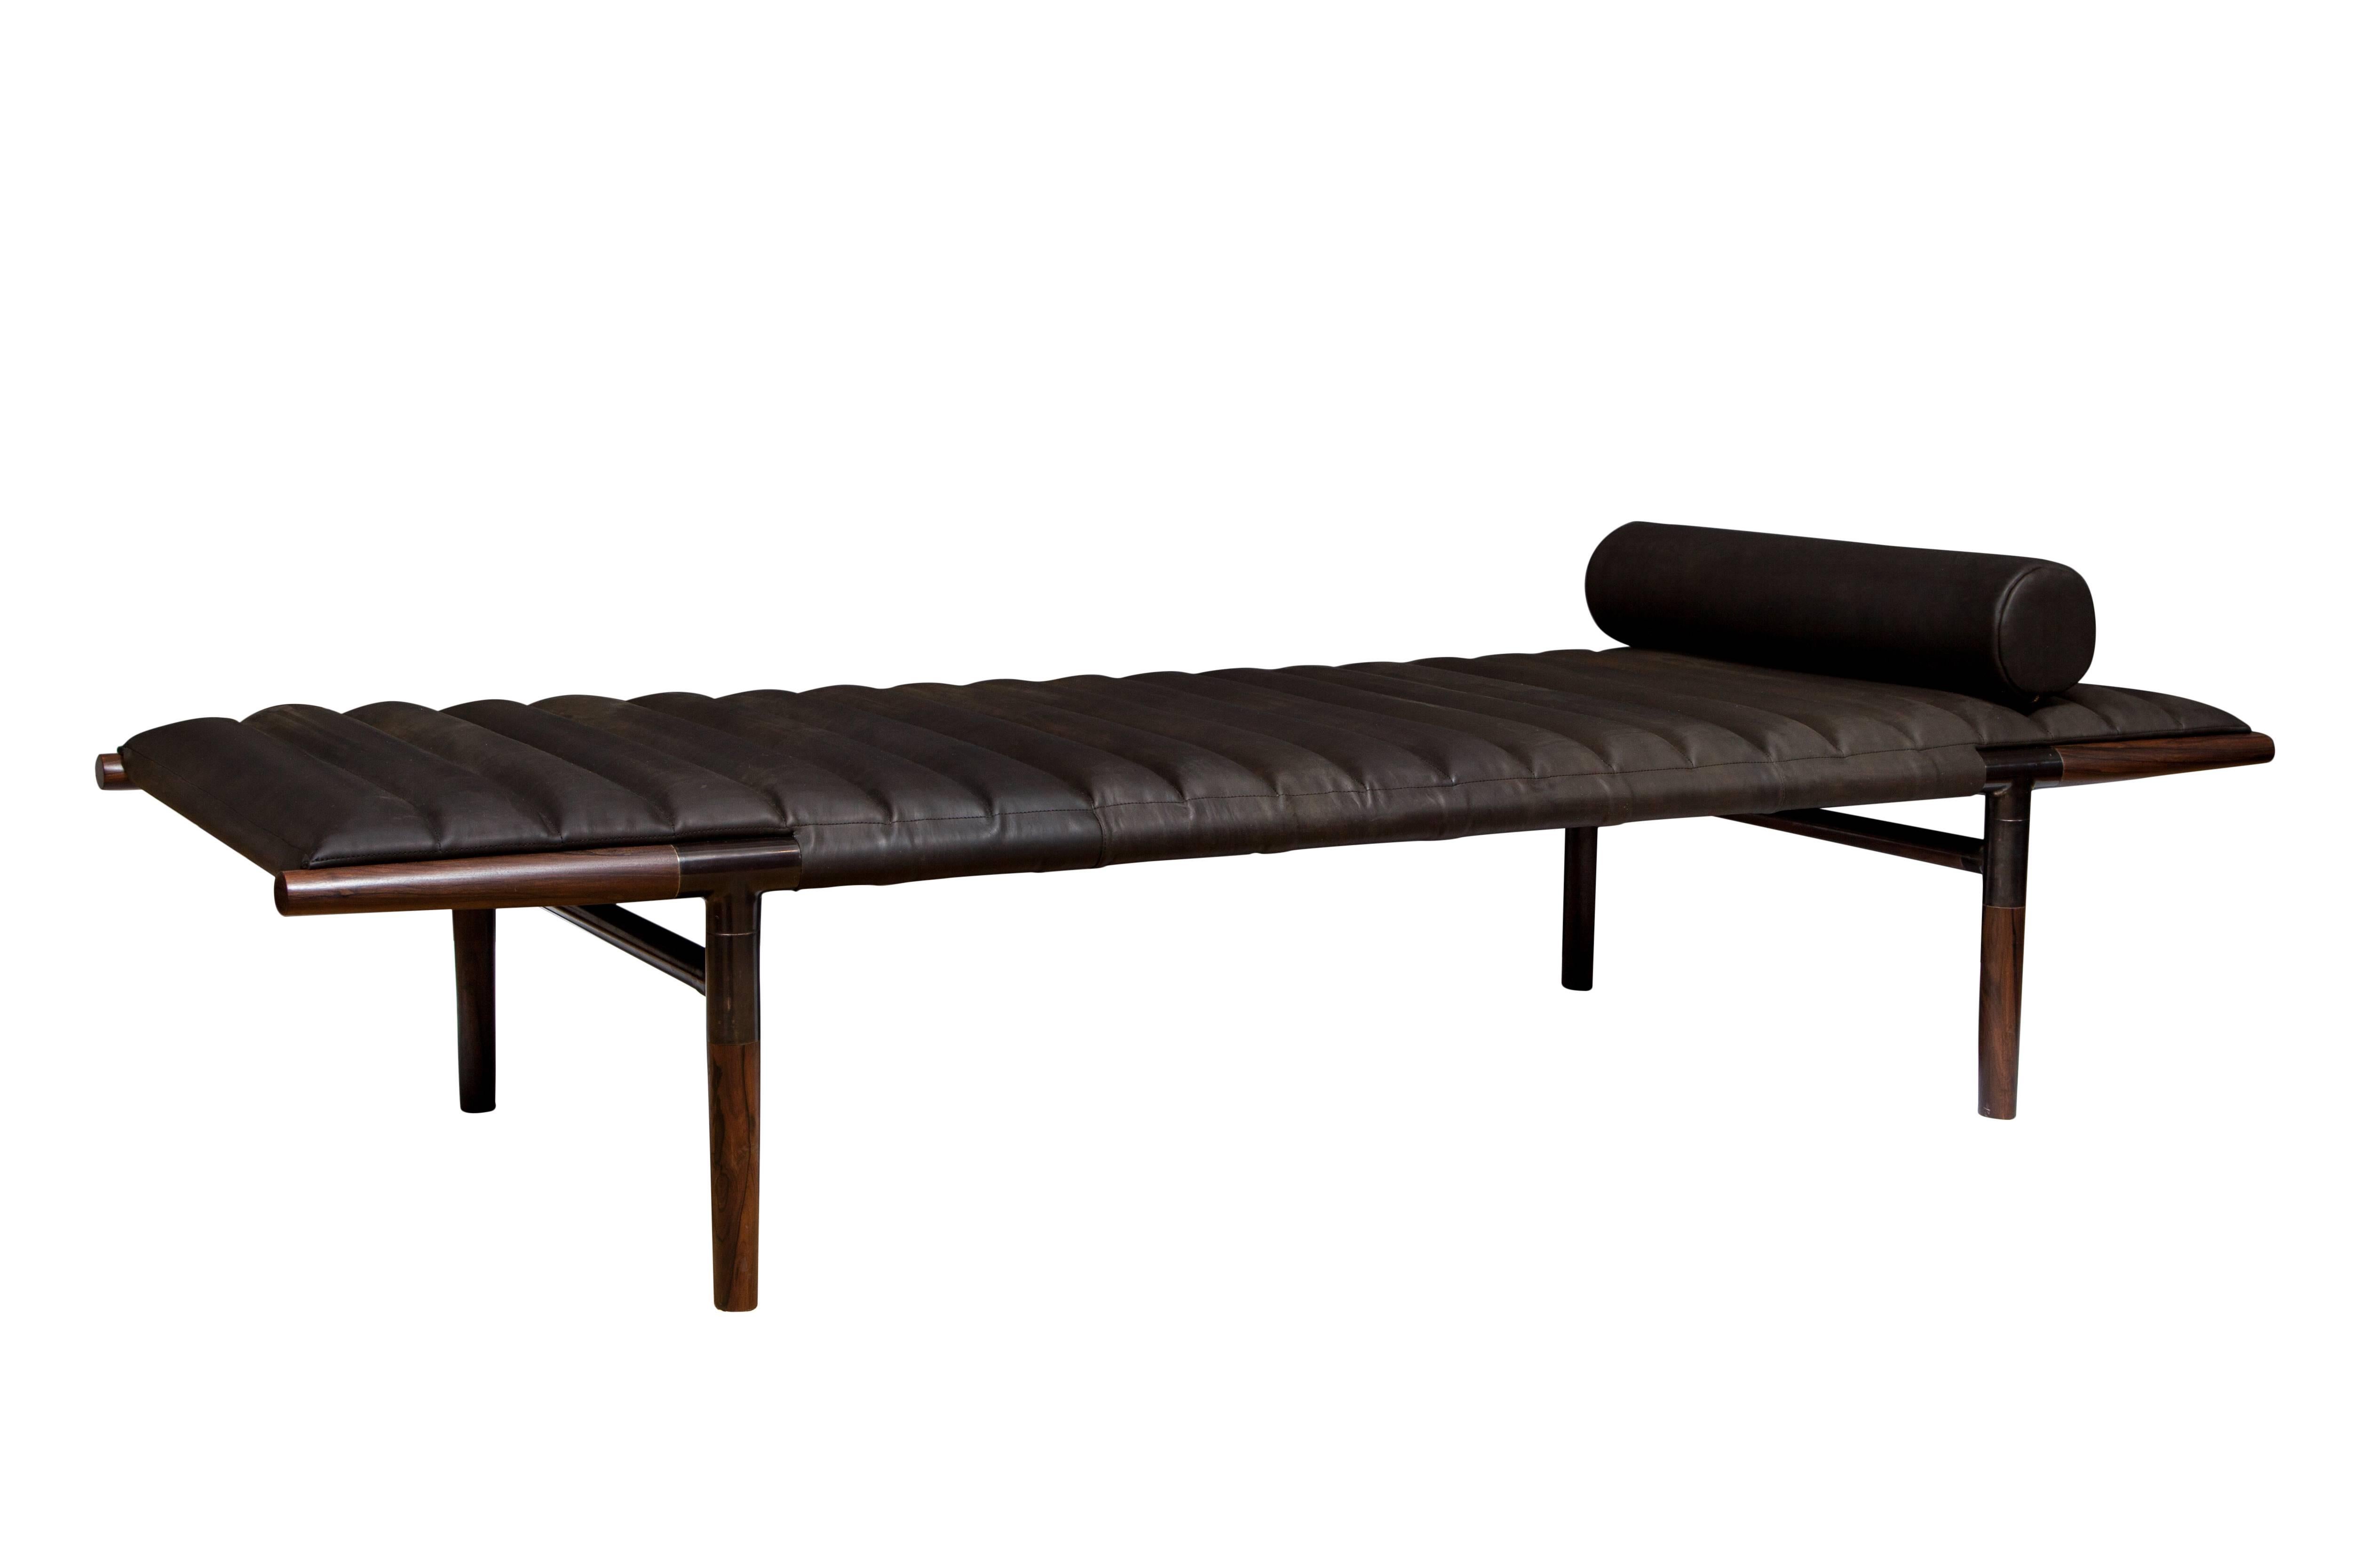 American Craftsman Erickson Aesthetics  Rosewood Daybed in Horween Leather